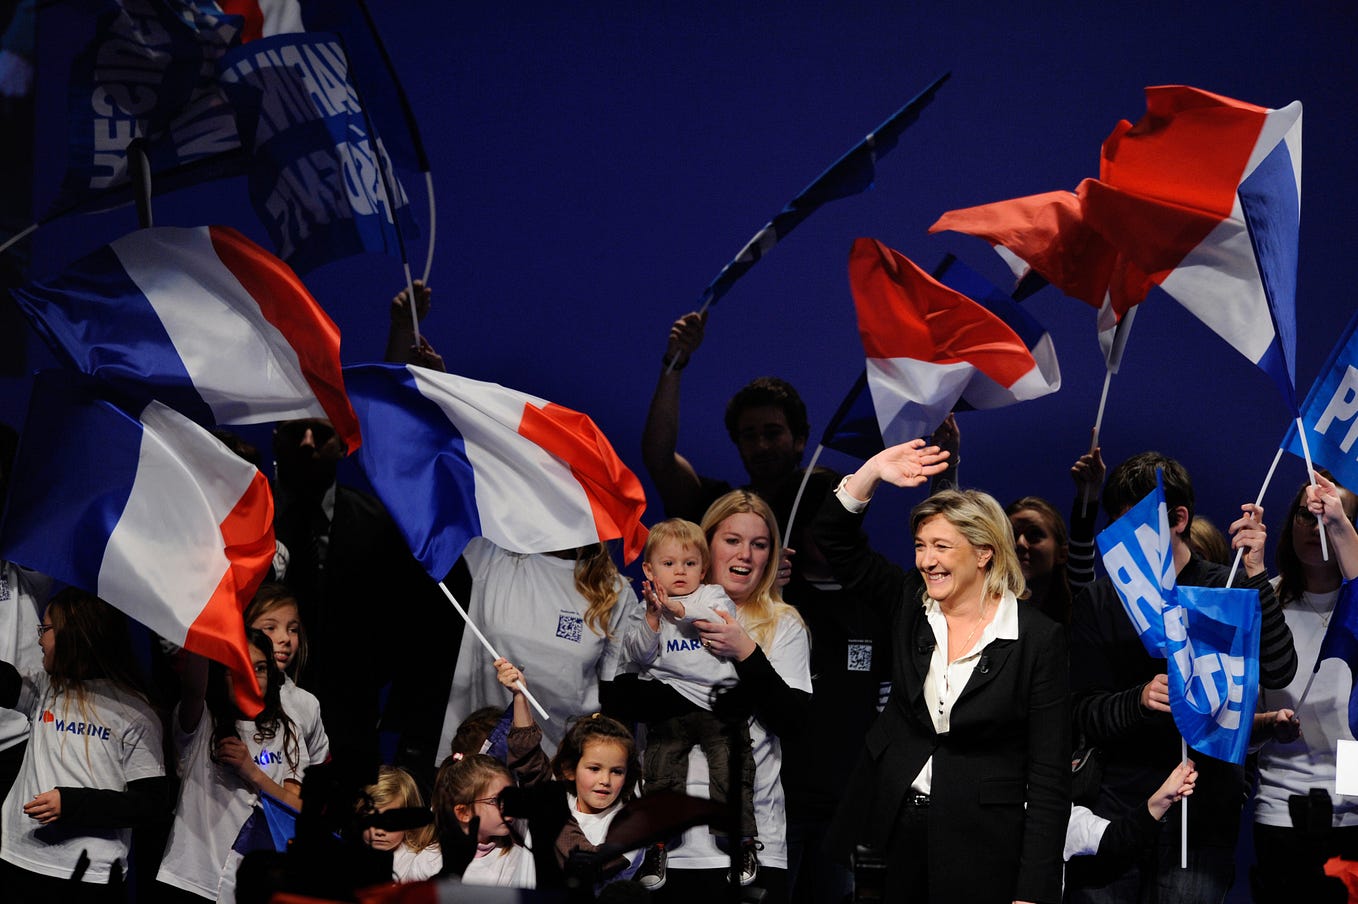 Marine Le Pen lost, but not the Front National